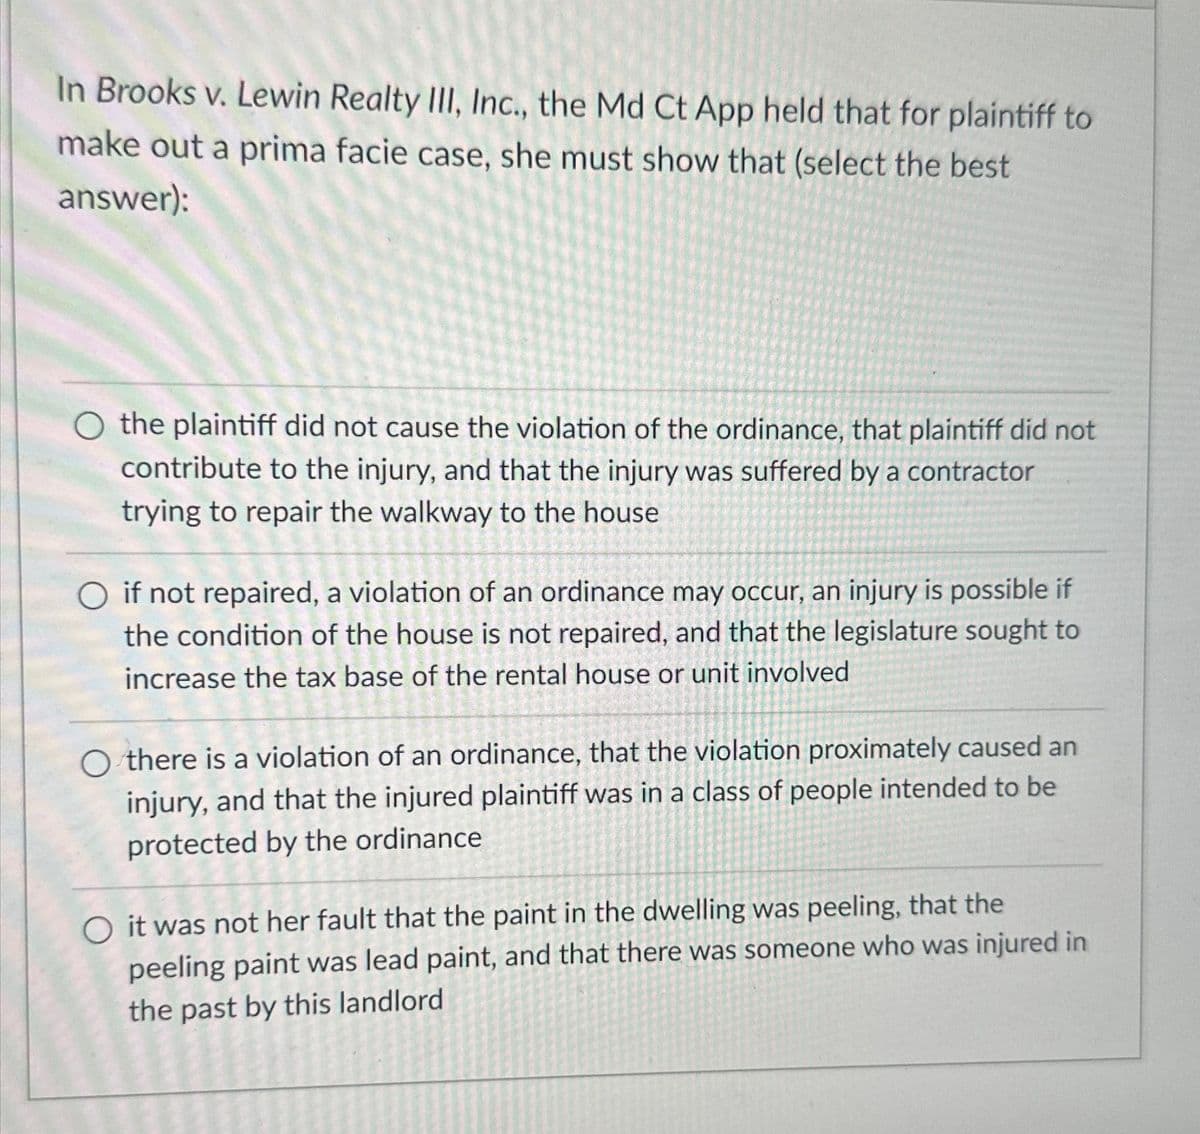 In Brooks v. Lewin Realty III, Inc., the Md Ct App held that for plaintiff to
make out a prima facie case, she must show that (select the best
answer):
O the plaintiff did not cause the violation of the ordinance, that plaintiff did not
contribute to the injury, and that the injury was suffered by a contractor
trying to repair the walkway to the house
if not repaired, a violation of an ordinance may occur, an injury is possible if
the condition of the house is not repaired, and that the legislature sought to
increase the tax base of the rental house or unit involved
Othere is a violation of an ordinance, that the violation proximately caused an
injury, and that the injured plaintiff was in a class of people intended to be
protected by the ordinance
O it was not her fault that the paint in the dwelling was peeling, that the
peeling paint was lead paint, and that there was someone who was injured in
the past by this landlord